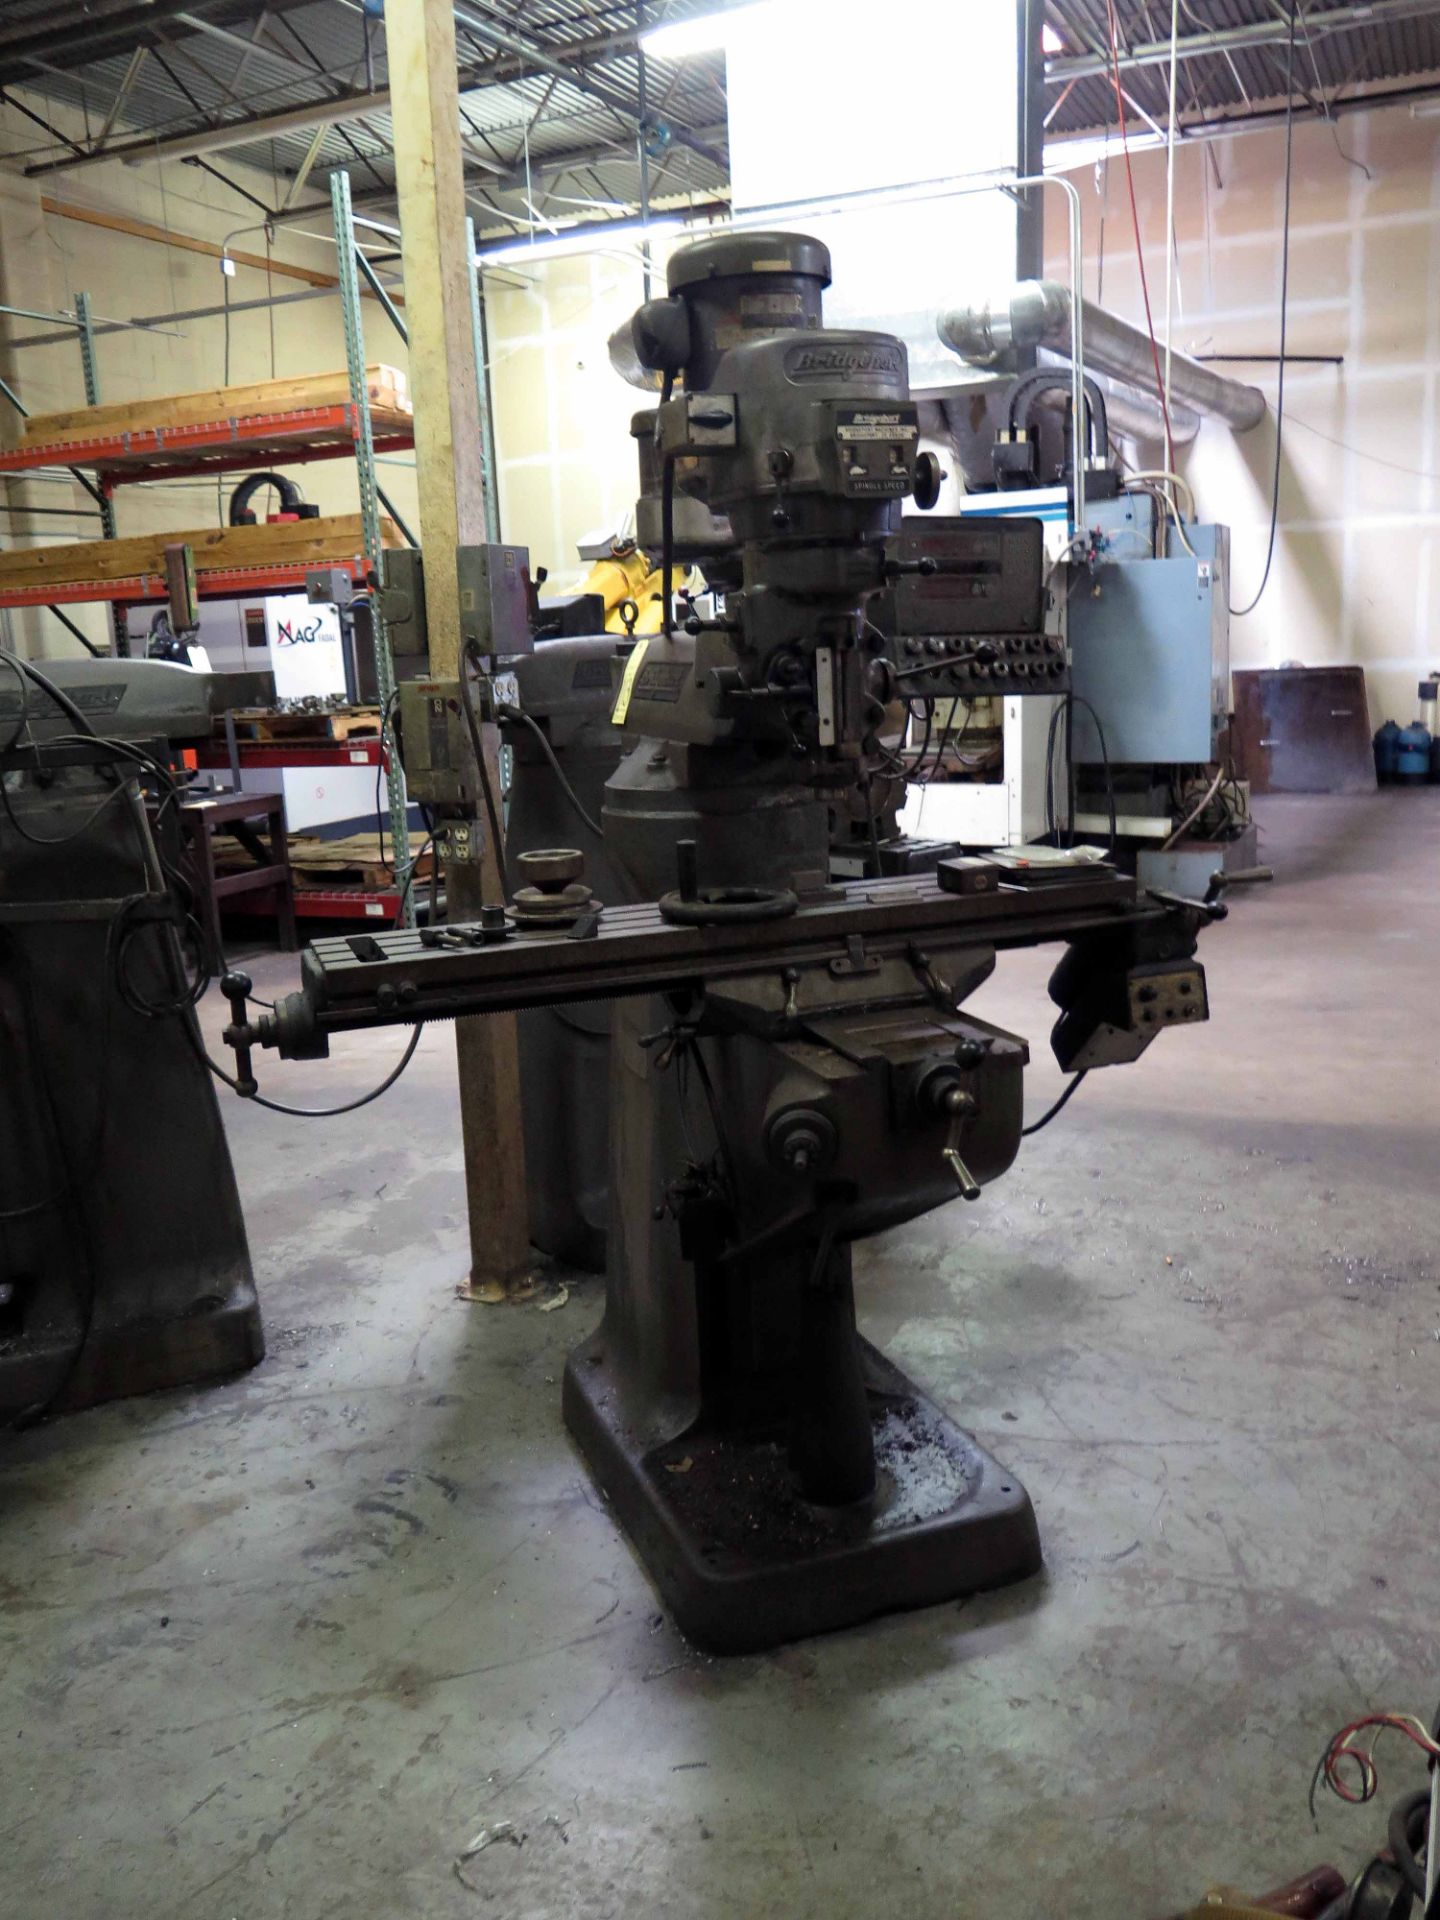 VERTICAL TURRET MILL, BRIDGEPORT SERIES 1, 9" x 48" table, 2 HP variable spd. drive, chrome ways, - Image 2 of 2